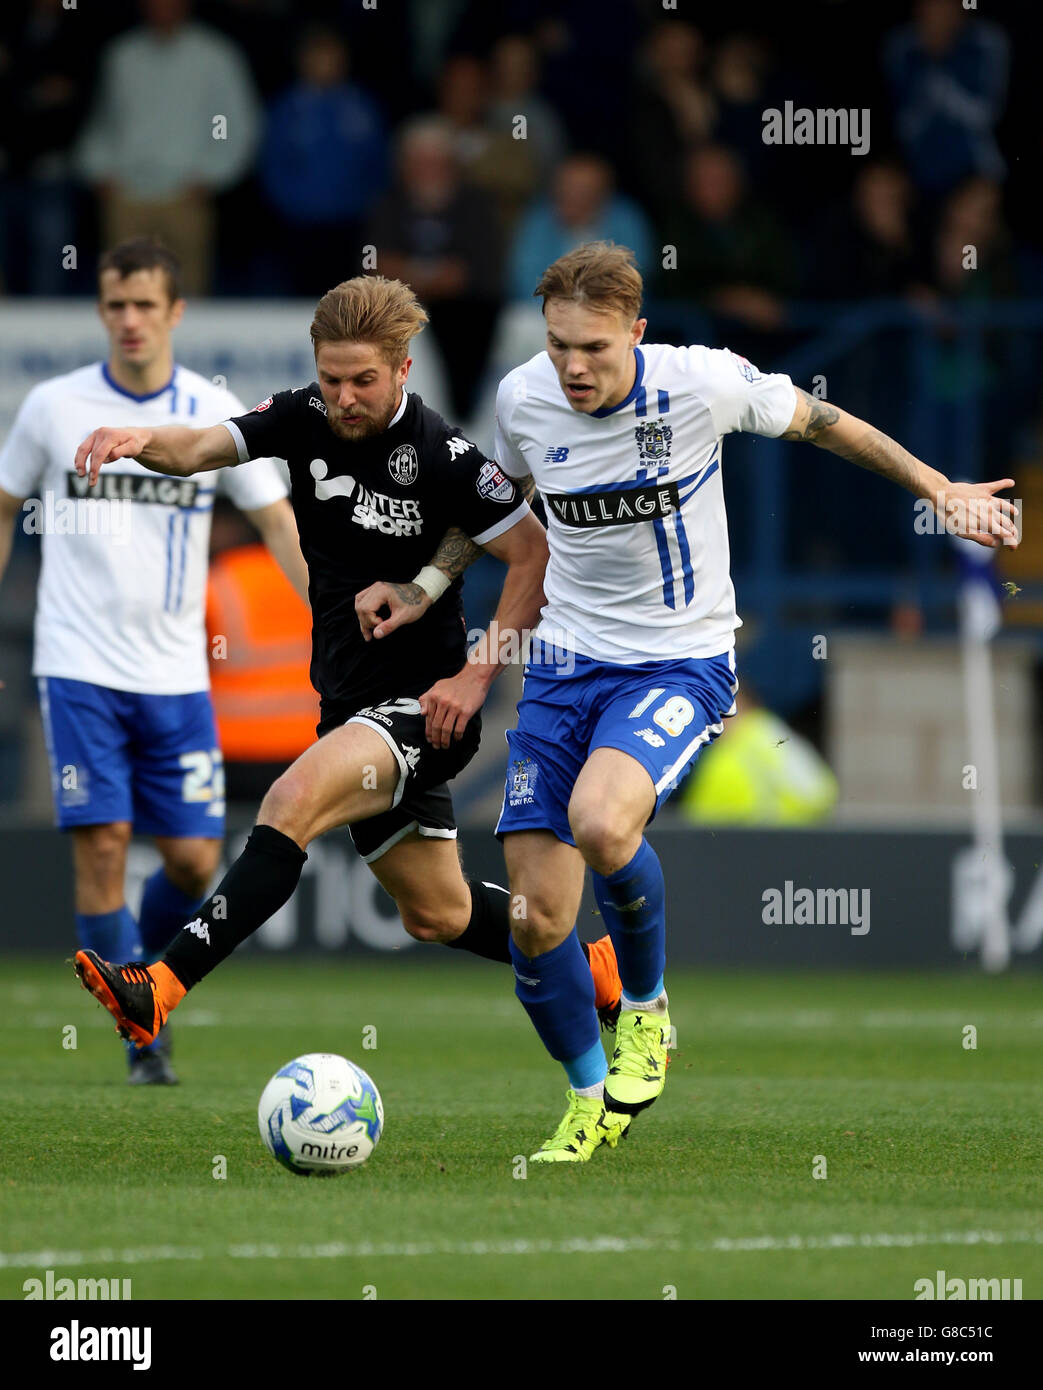 Soccer - Sky Bet League One - Bury v Wigan Athletic - Gigg Lane. Wigan Athletic's Michael Jacobs challenges Bury's Lee Irwin Stock Photo